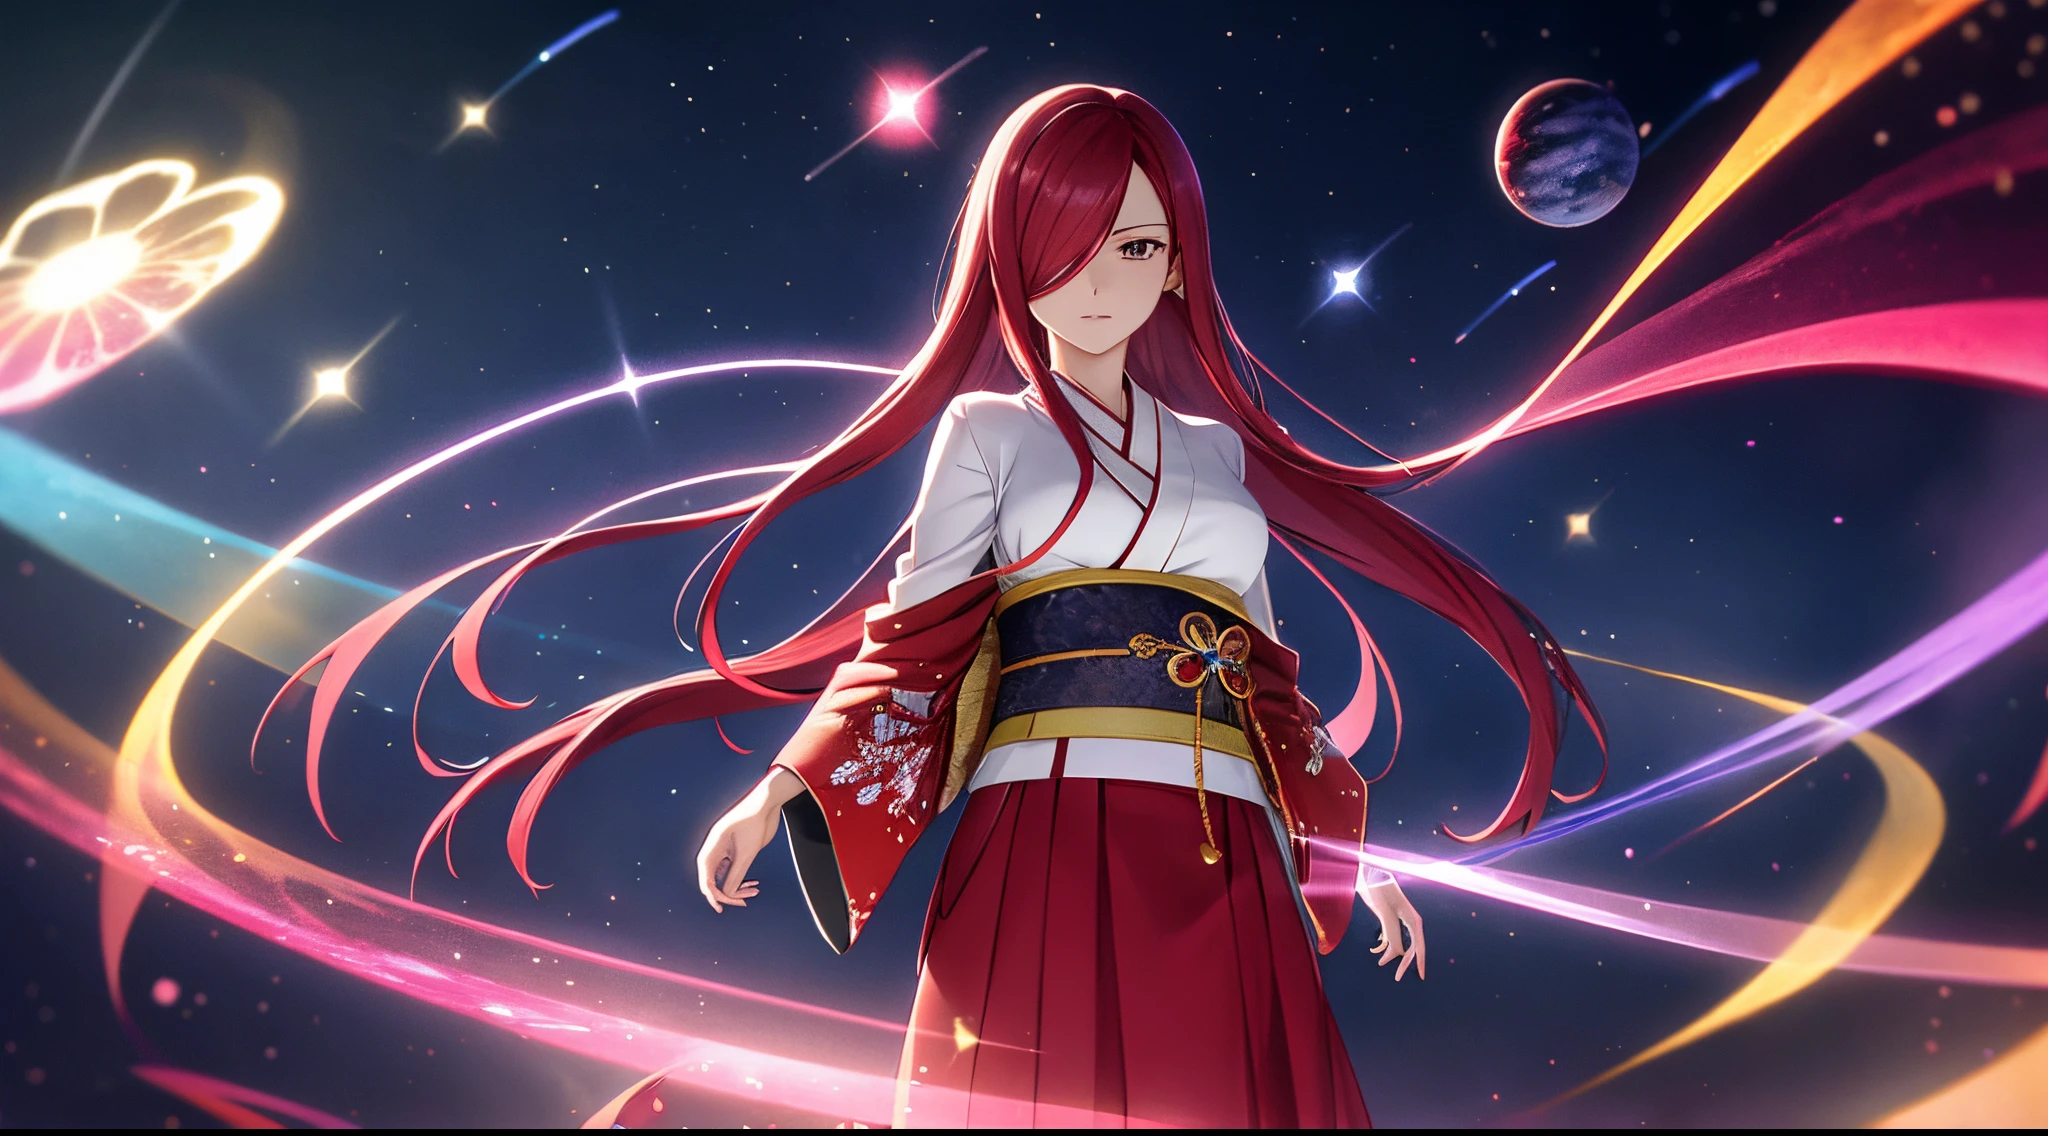 erza, 1girl, solo, long_hair, medium breasts,brown_eyes,red_hair,hair over one eye, standing, looking at viewer,cosmic stars kimono,praying beads on neck, long skirt,outer space galaxy and nebulae,anime style,deep depth of field,wide angle view,Lumen Reflections,Screen Space Reflections,Diffraction Grading,Chromatic Aberration,GB Displacement,Scan Lines,Ray Traced,Anti-Aliasing,FXAA,TXAA,RTX,SSAO,Shaders,OpenGL-Shaders,GLSL-Shaders,Post Processing,Post-Production,cell Shading,Tone Mapping,CGI,VFX,SFX,insanely detailed and intricate, 4K